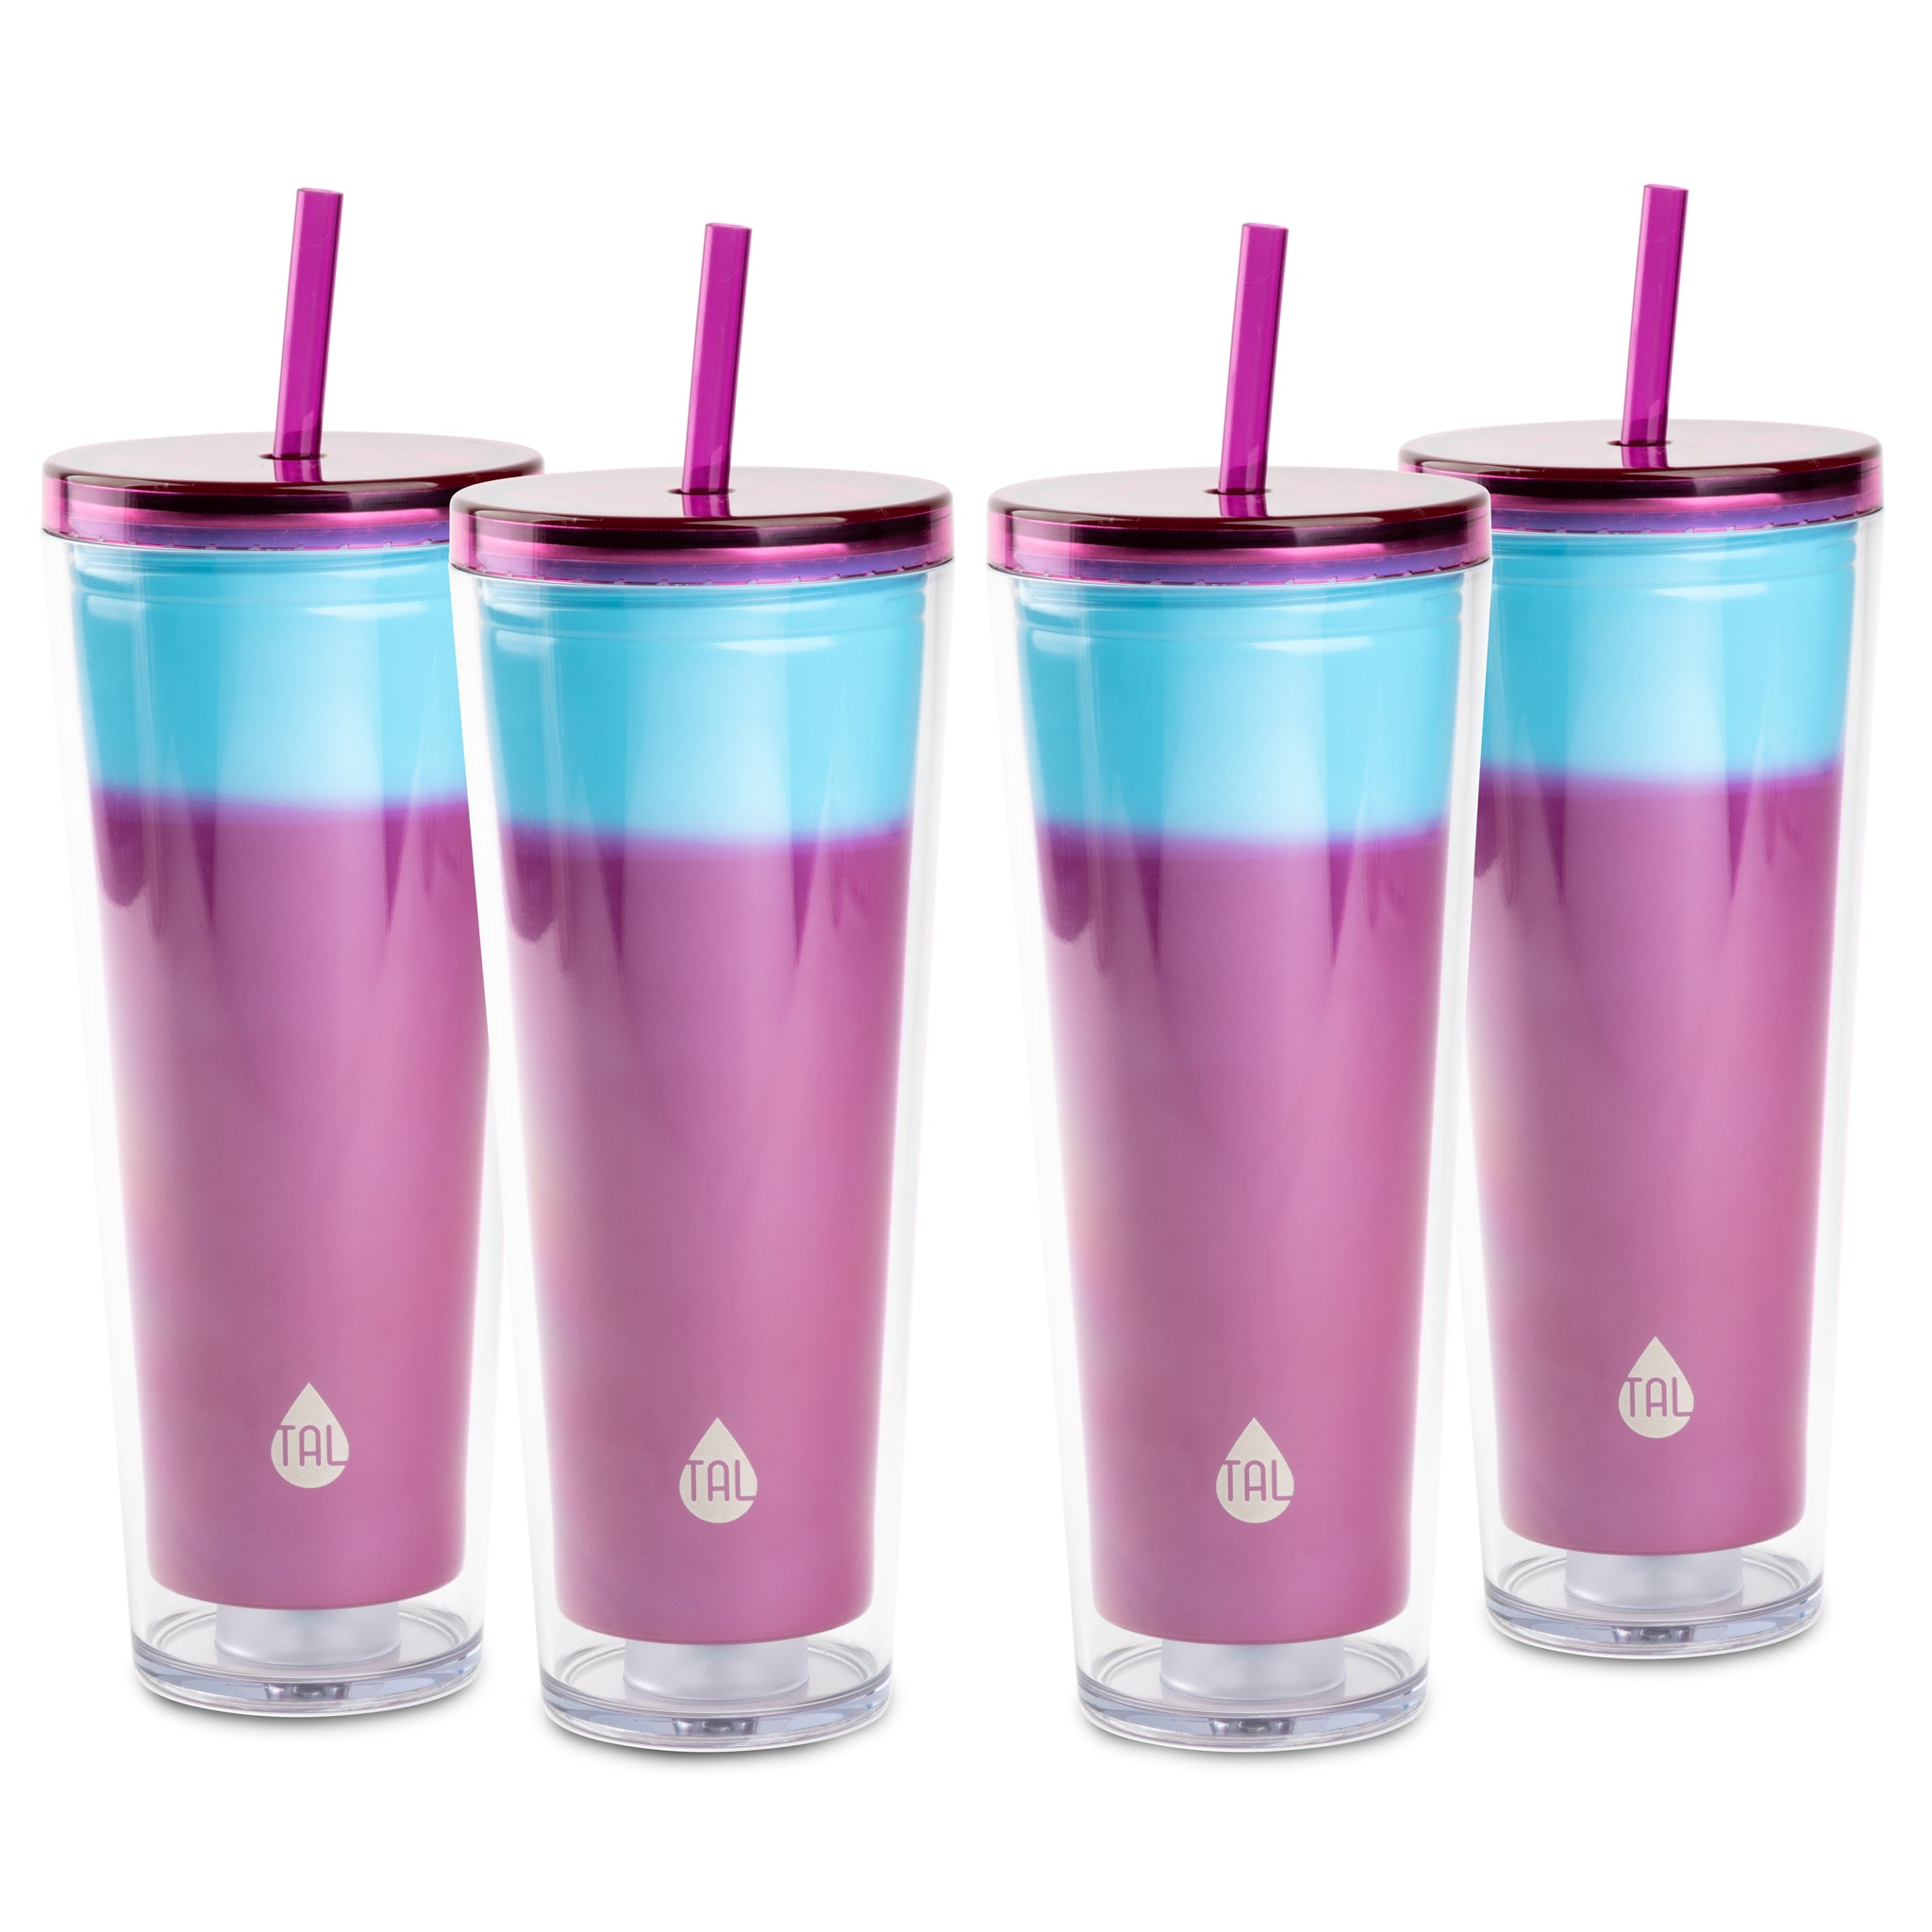 TAL Double Walled Color Changing Tumblers 2 Pack, 24 fl oz, Heart Pink